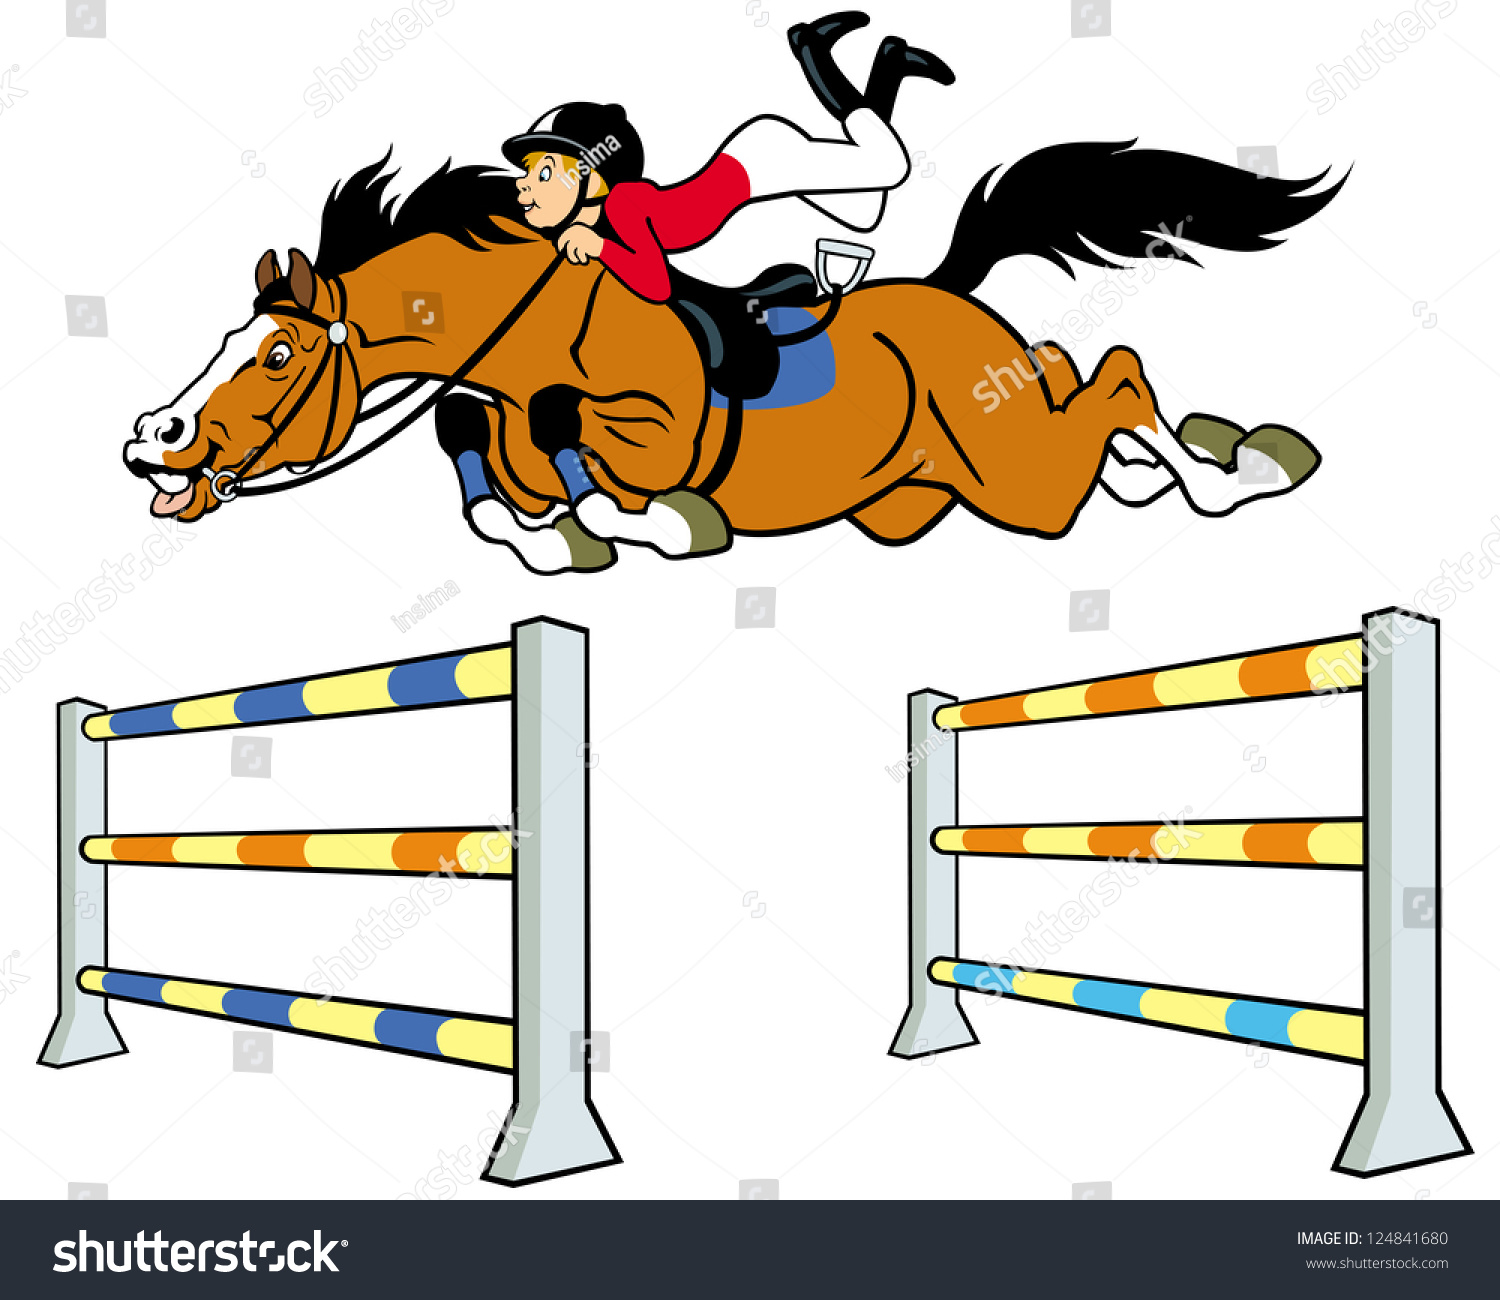 horse jumping clipart - photo #46